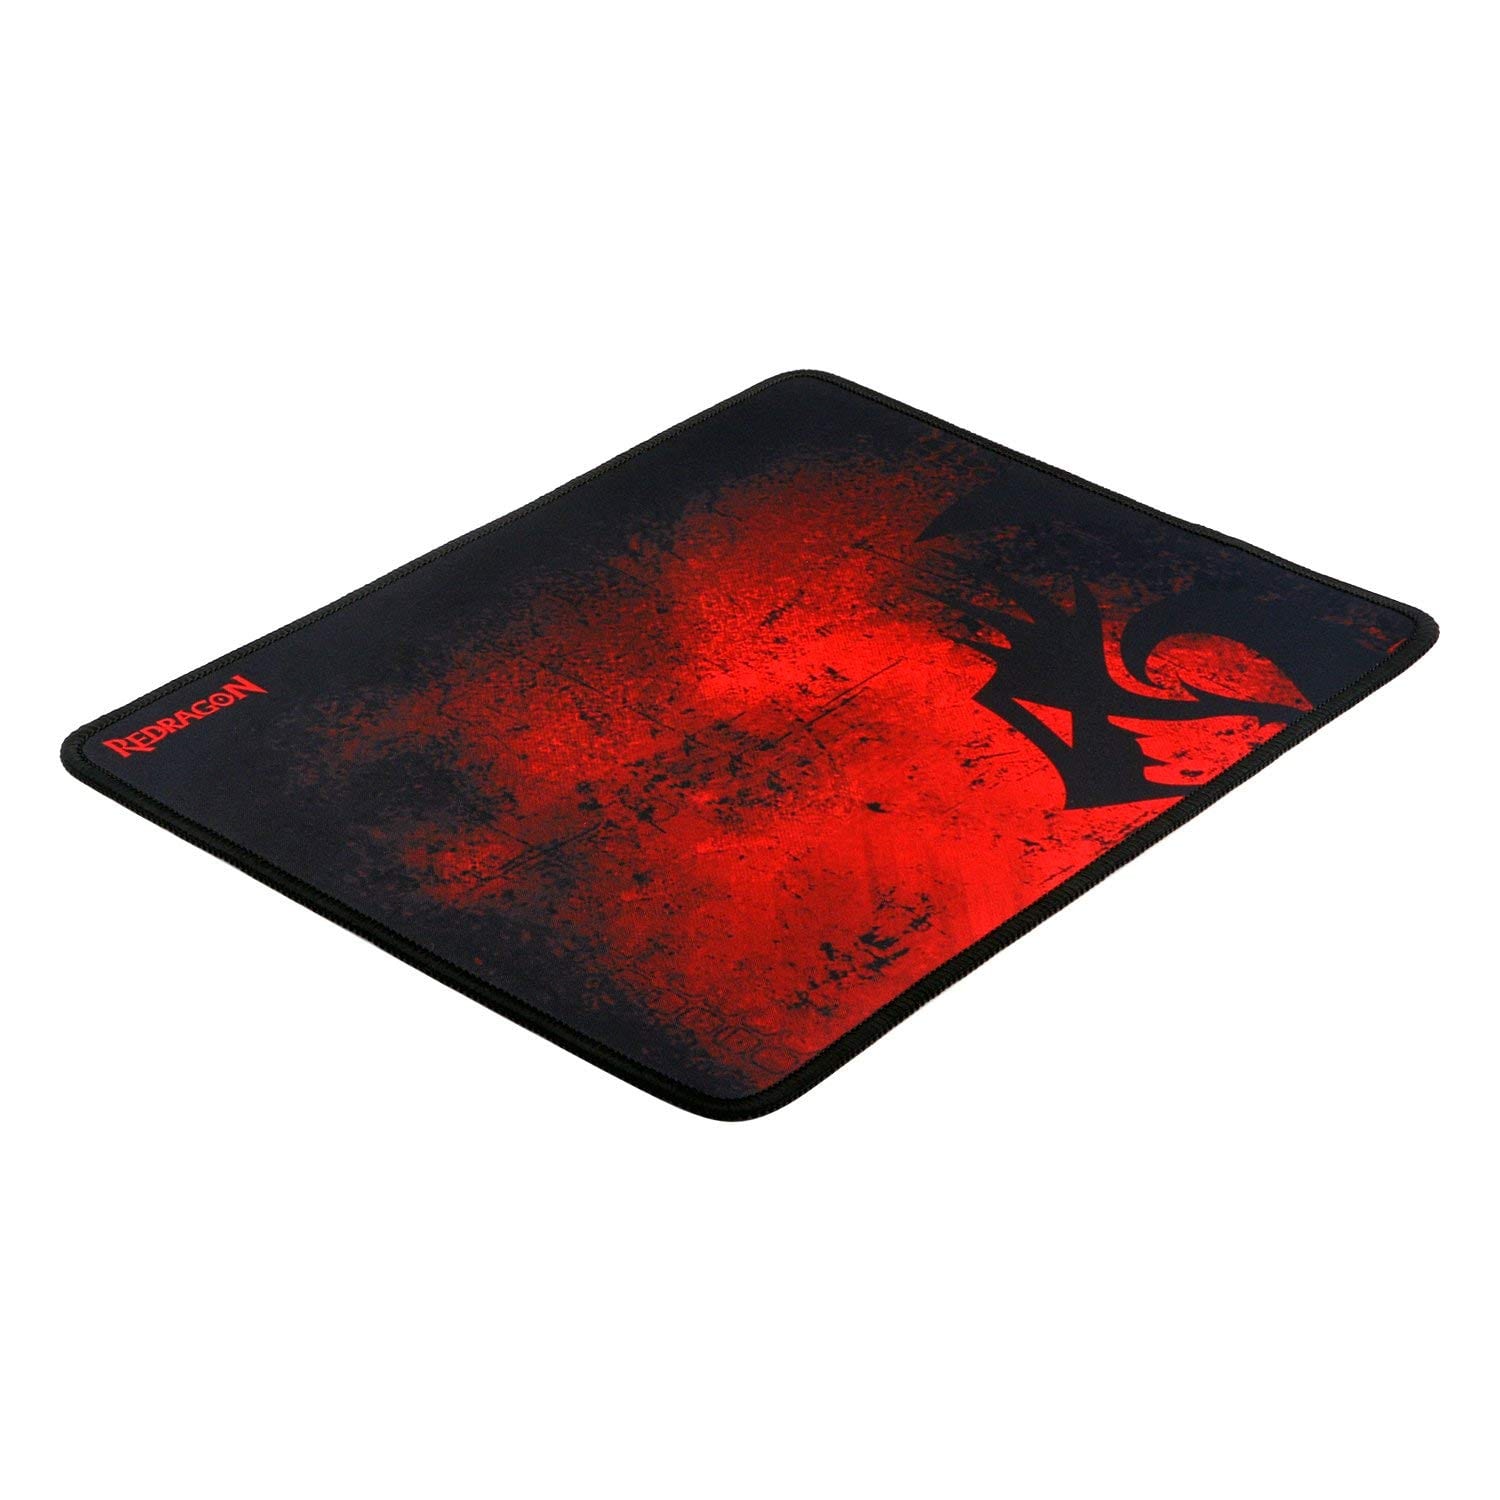 redragon-pisces-gaming-mouse-pad-330x260x3mm-3-image